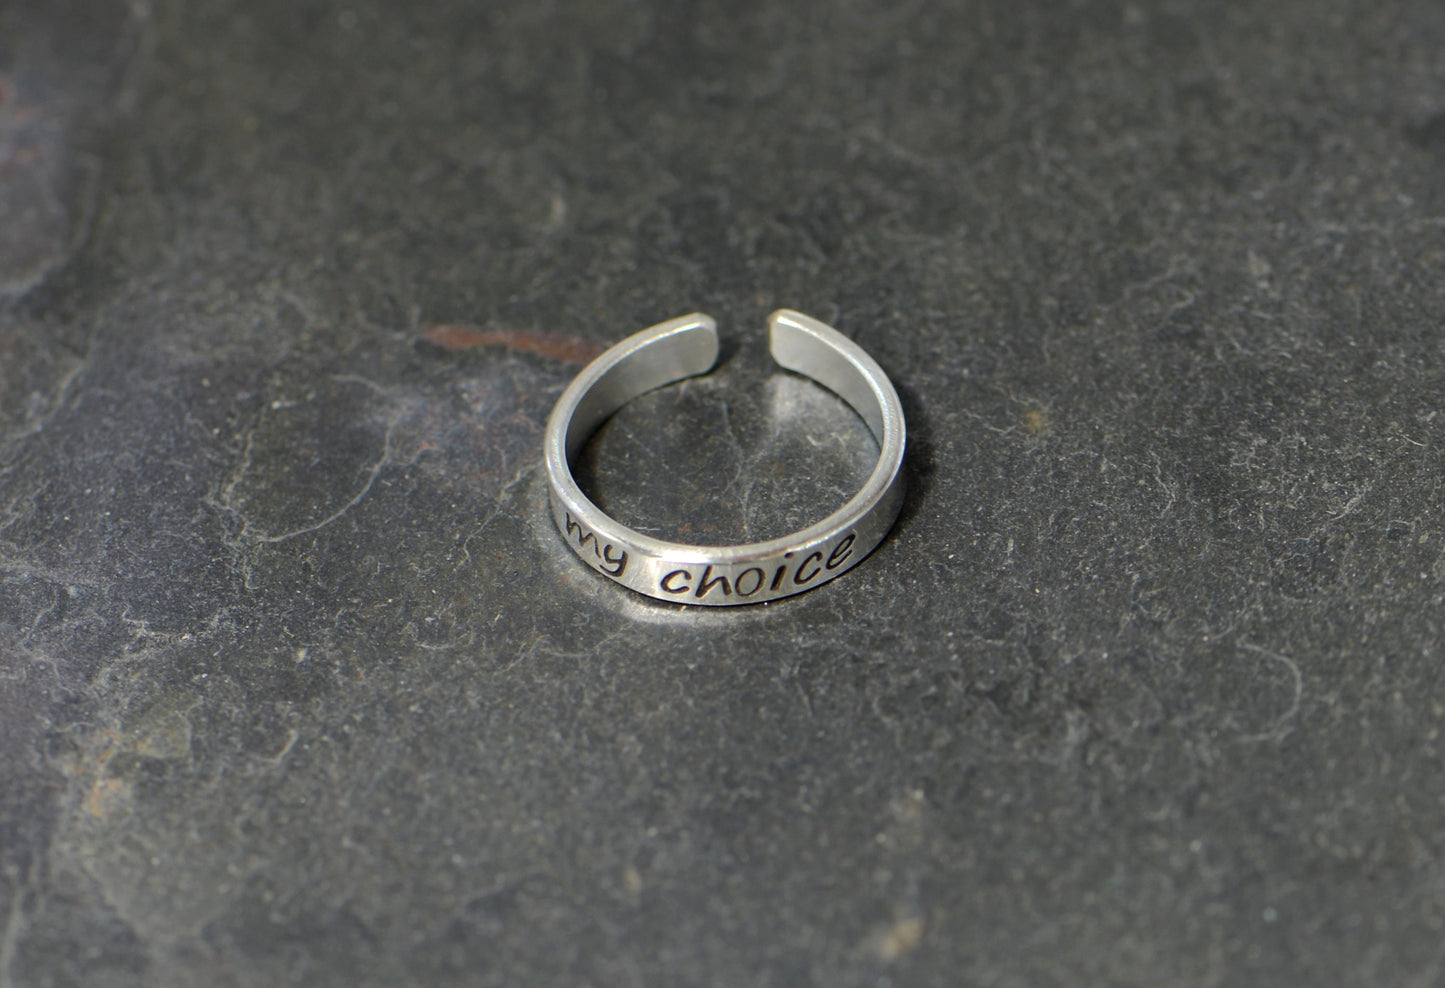 Sterling silver toe ring with my choice